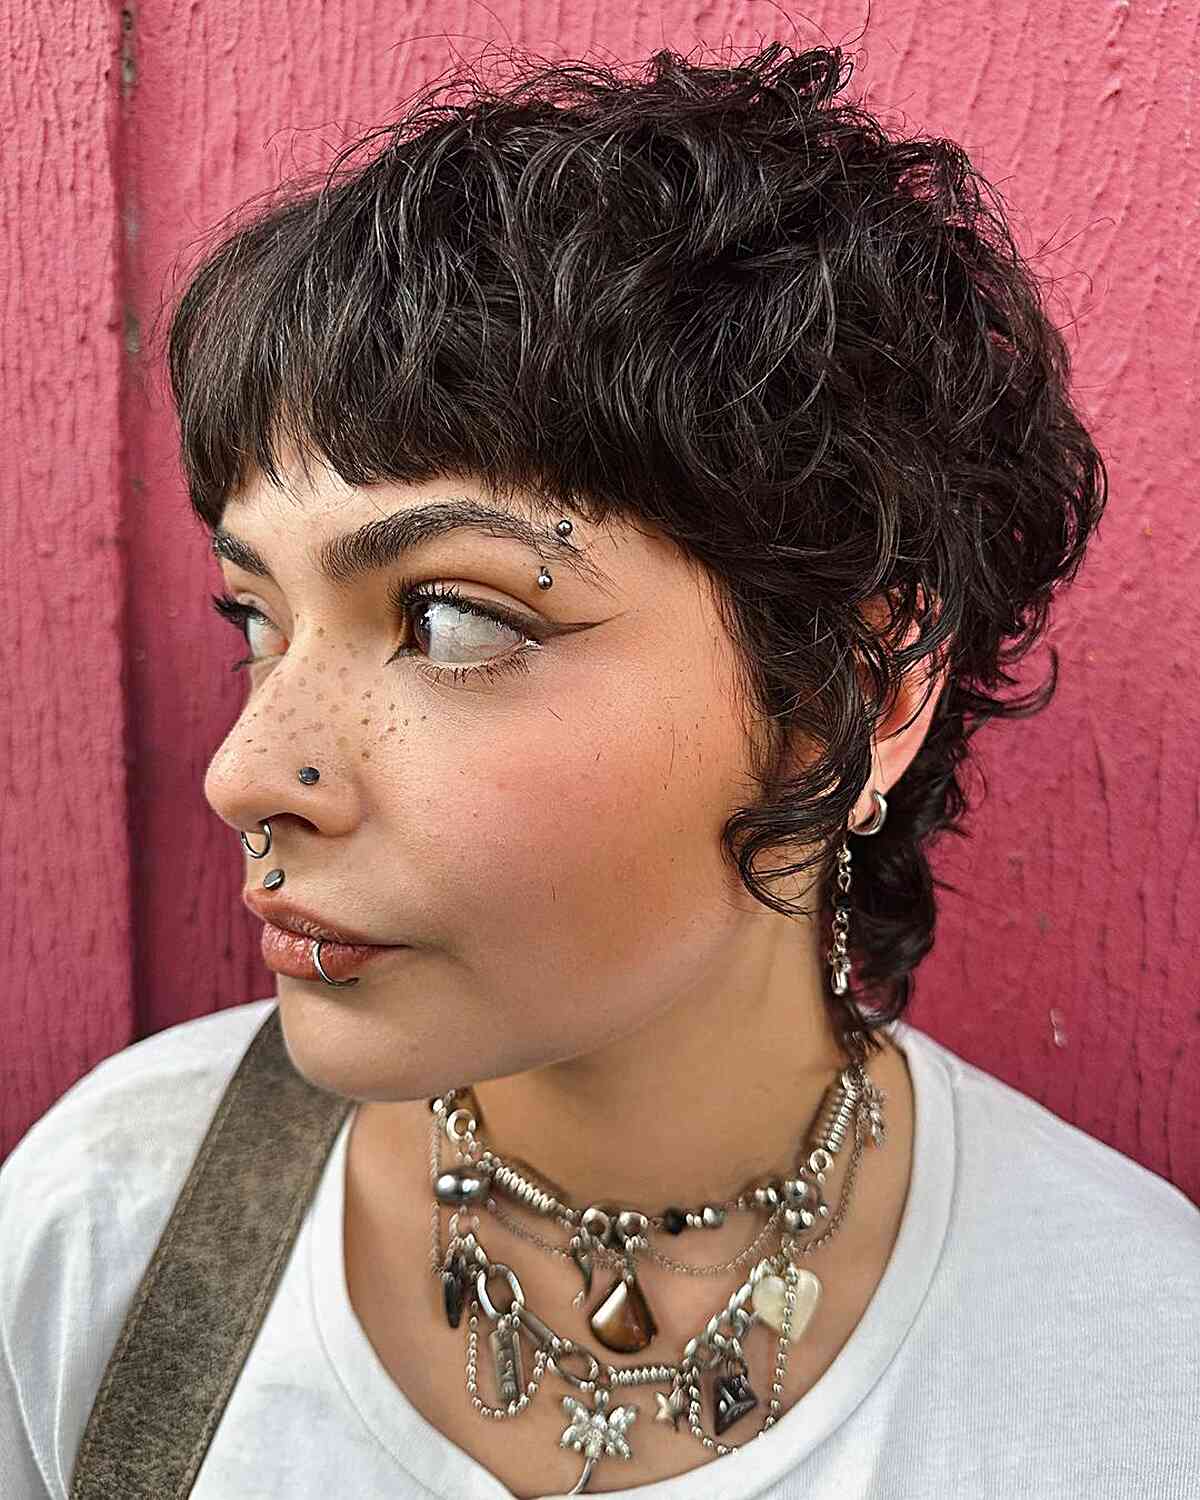 Grunge-Inspired Shaggy Mullet Cut for girls with an edgy side